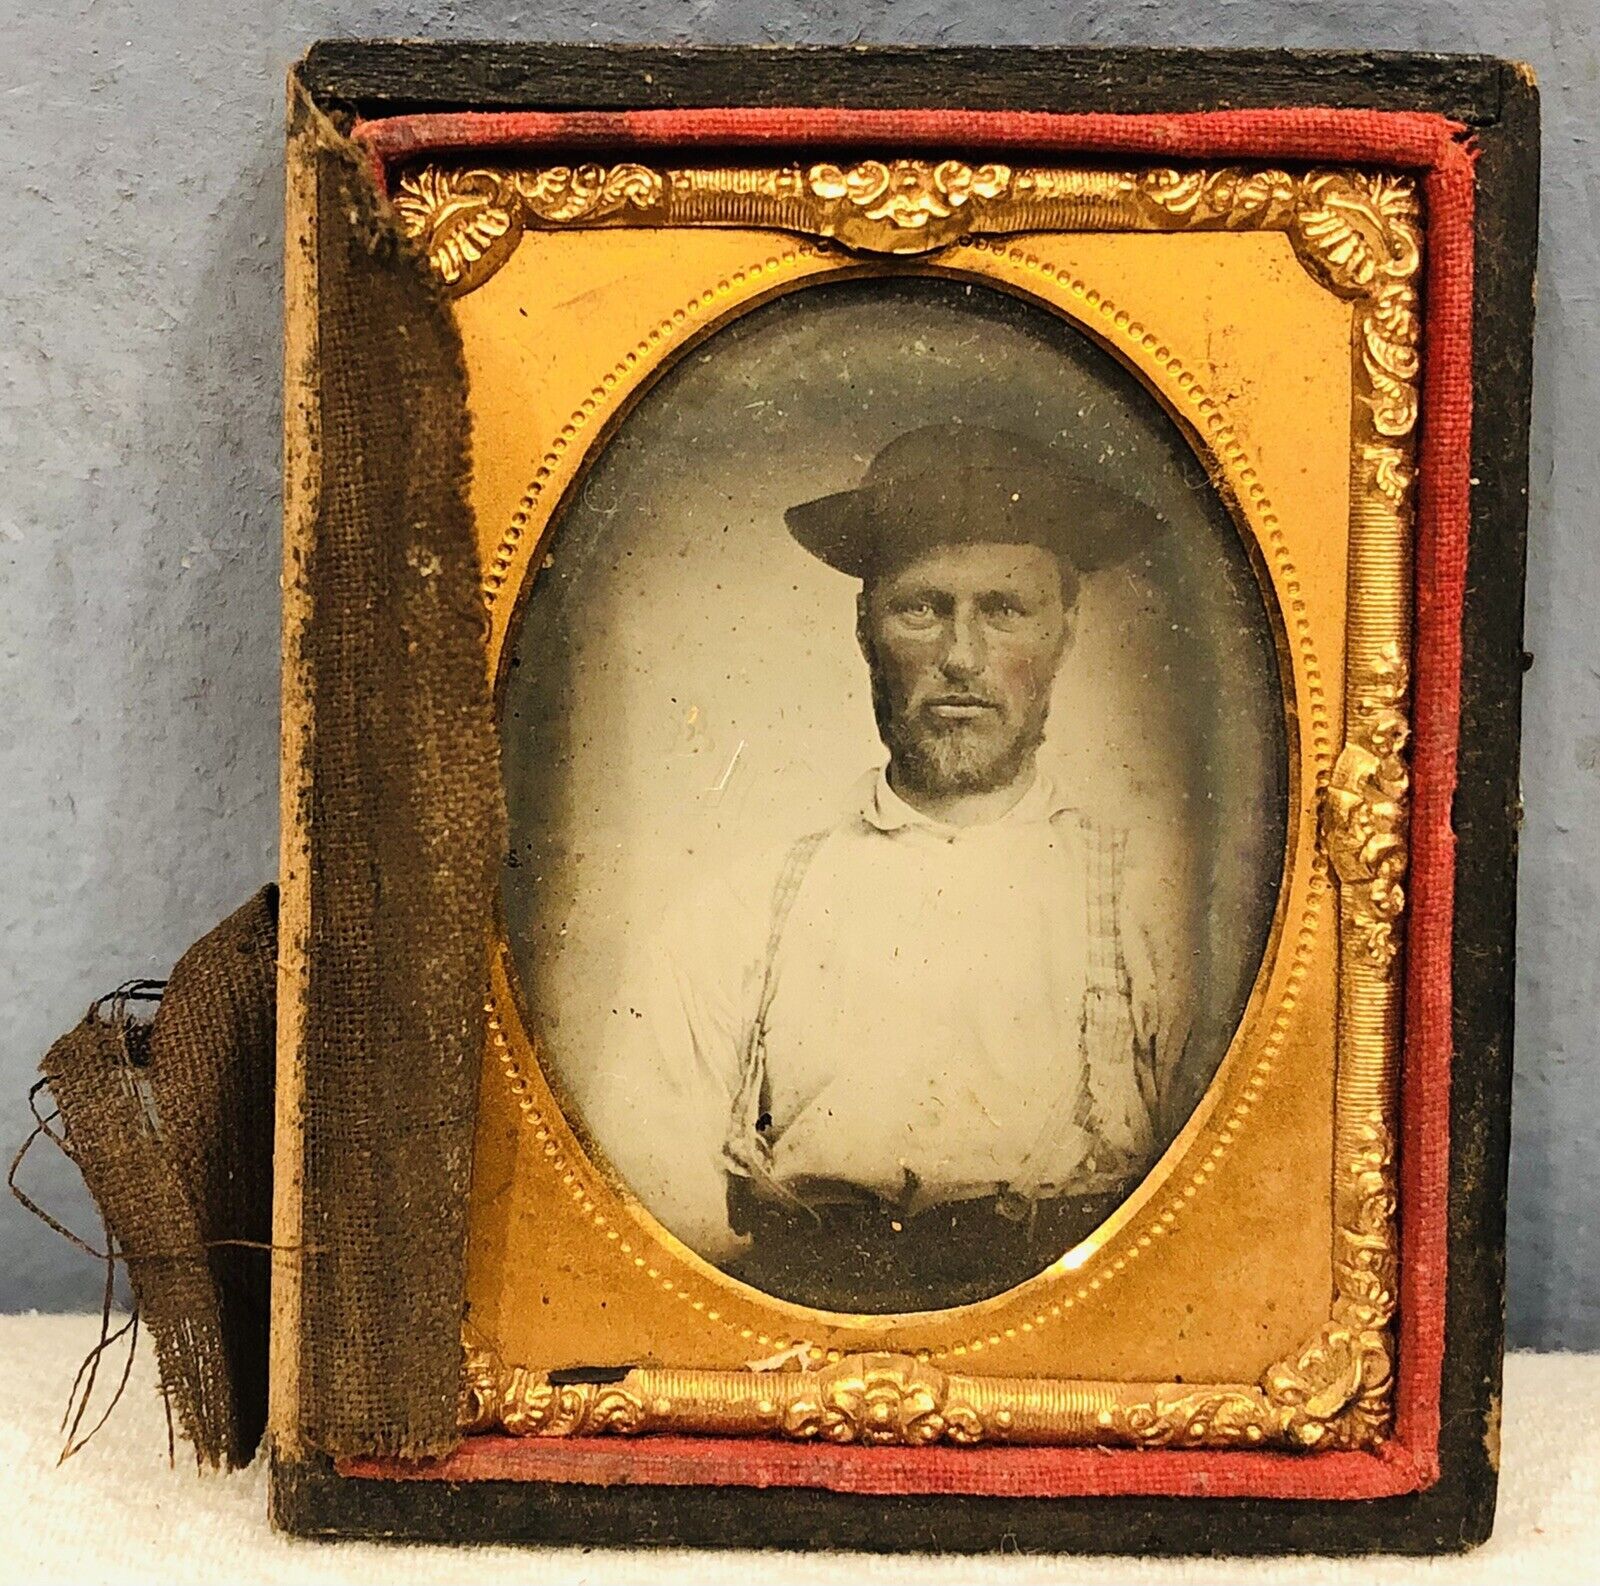 WoW 1850s California 49ers Gold Rush Miner Prospector Panner Ambrotype Photo